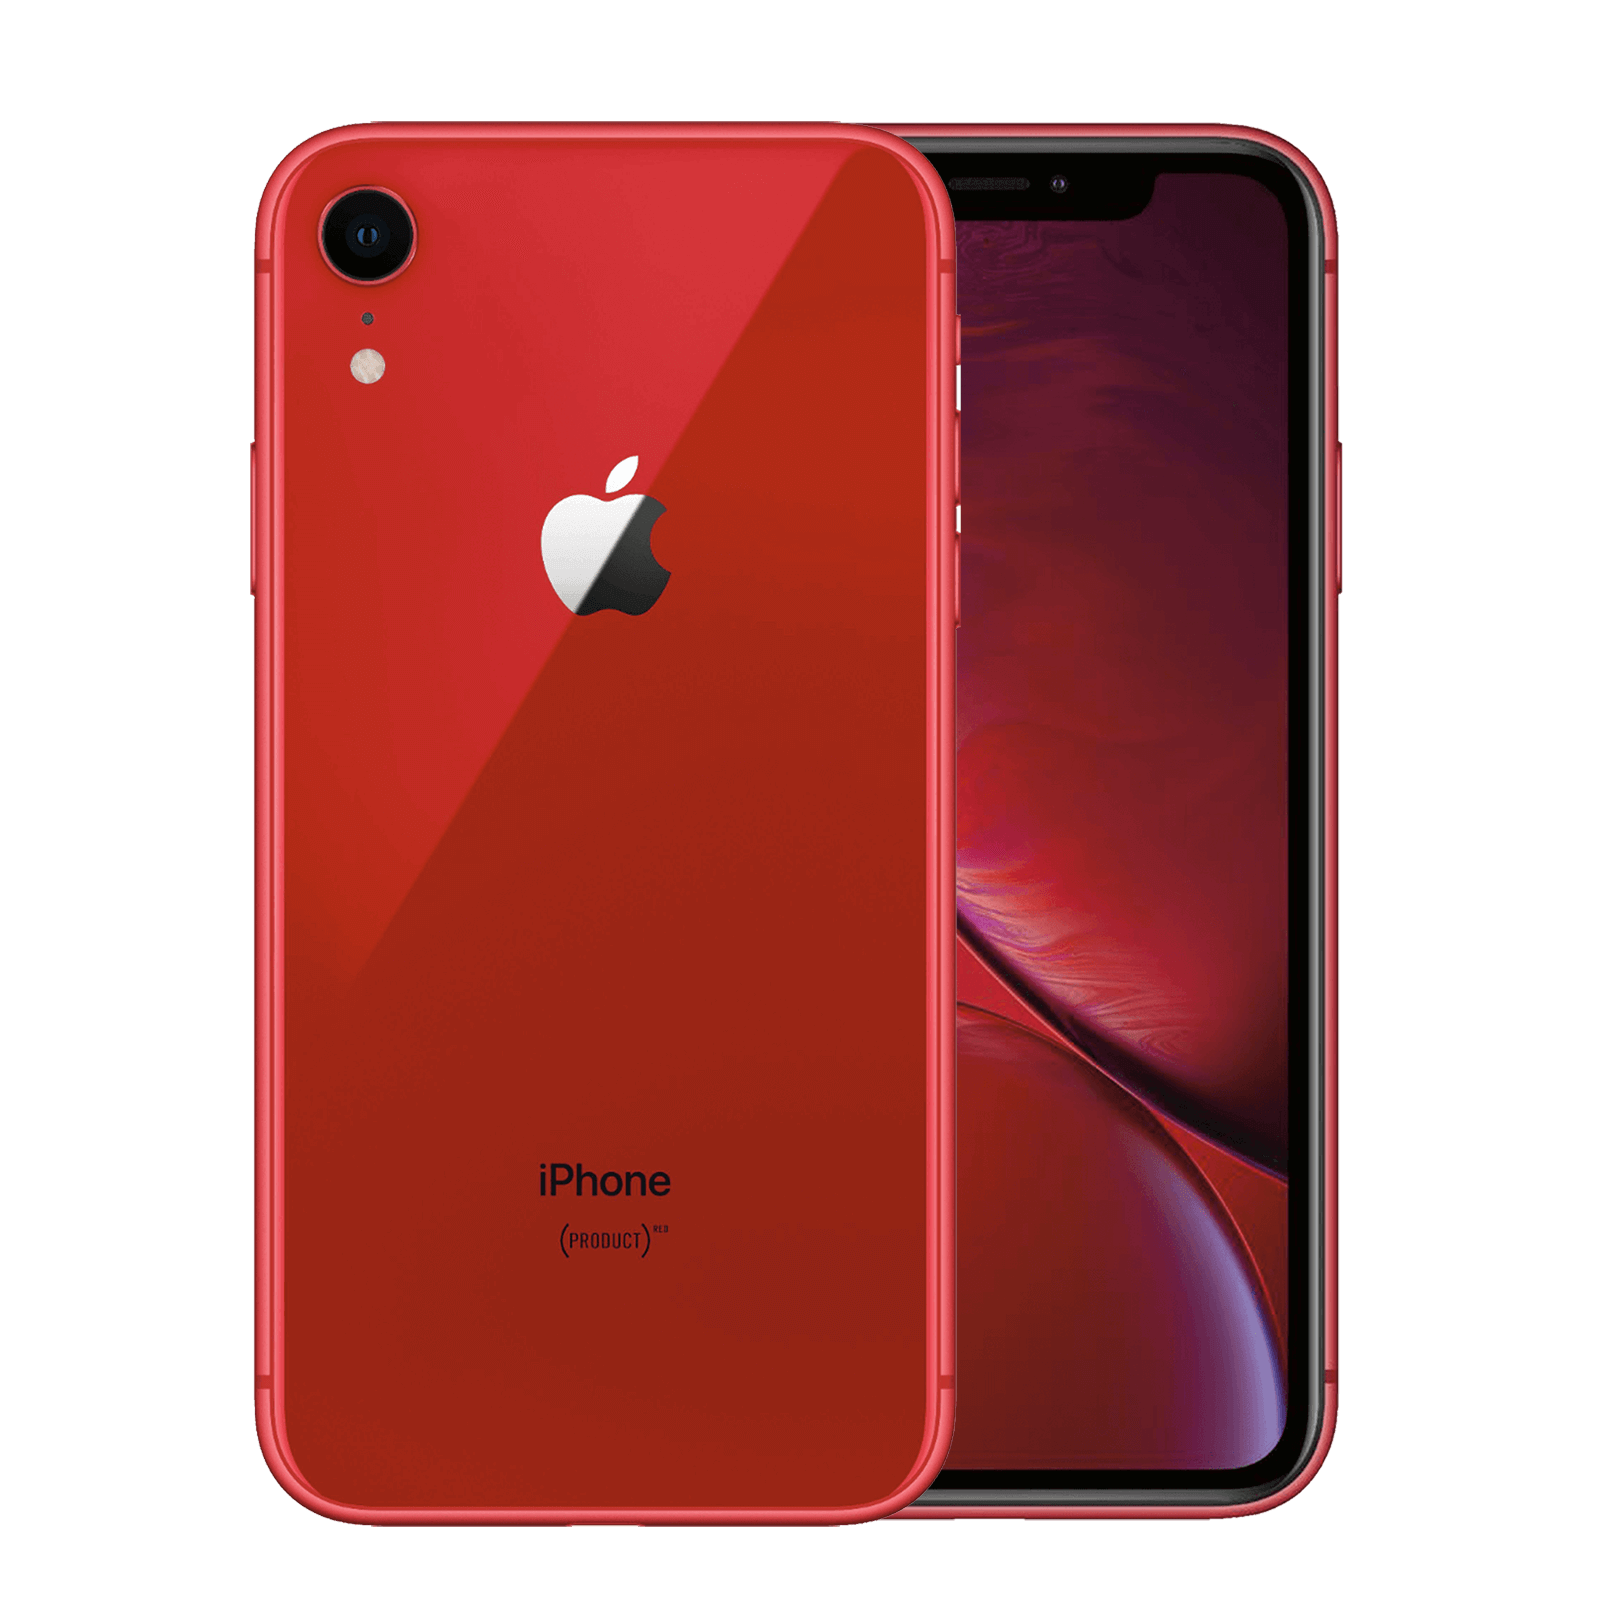 Apple iPhone XR 128GB Product Red Pristine - Unlocked